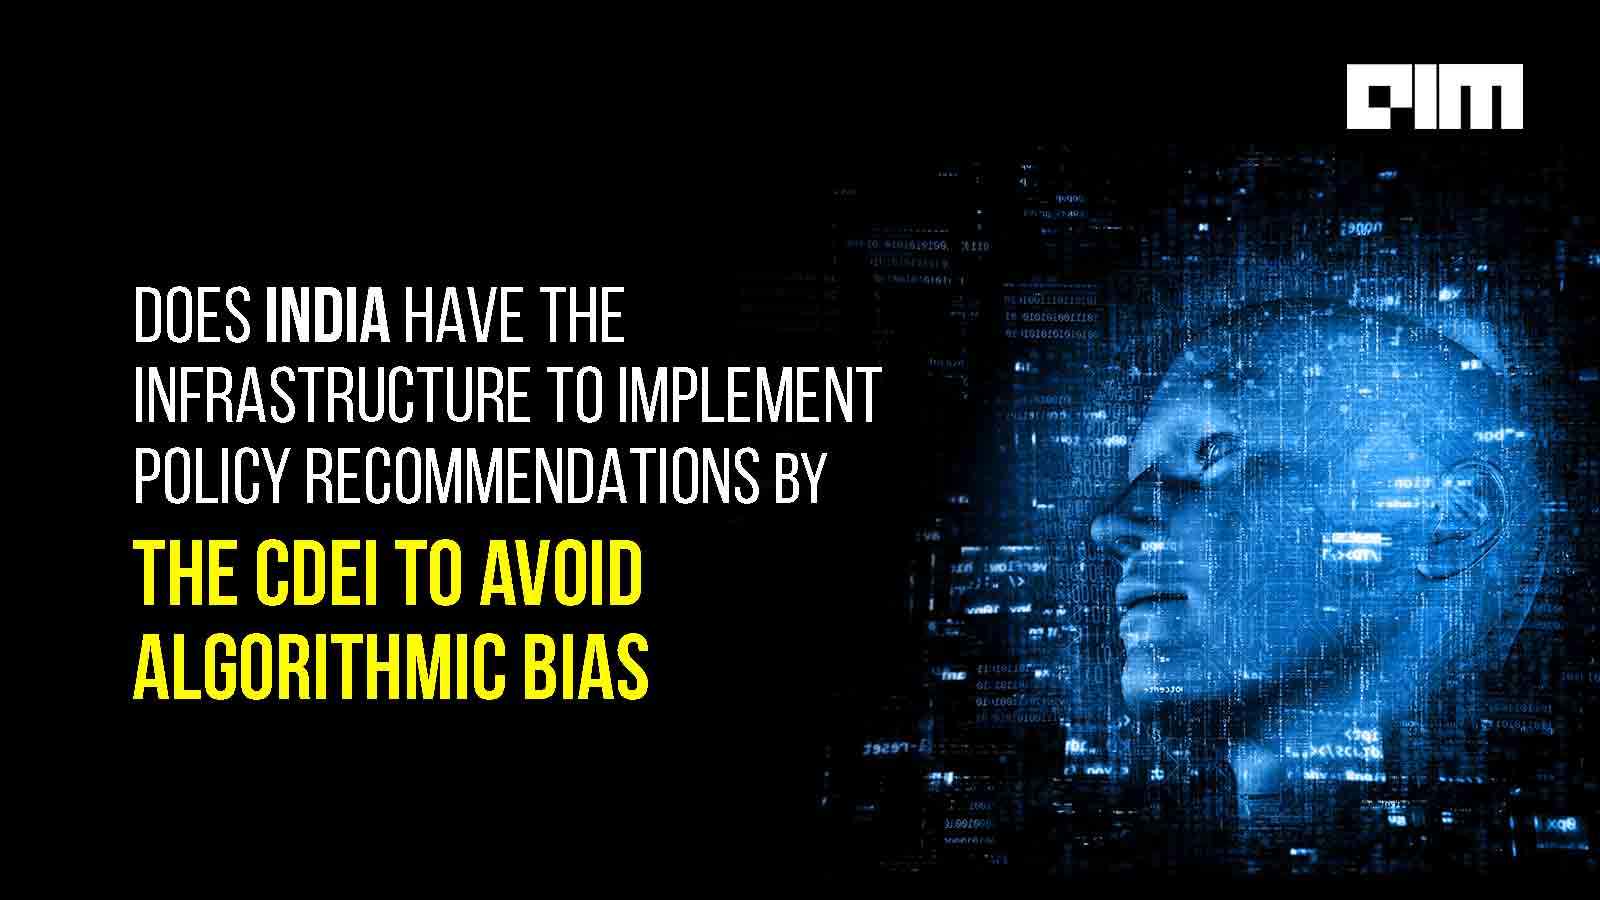 Does India Have The Infrastructure To Implement Policy Recommendations To Avoid Algorithmic Bias